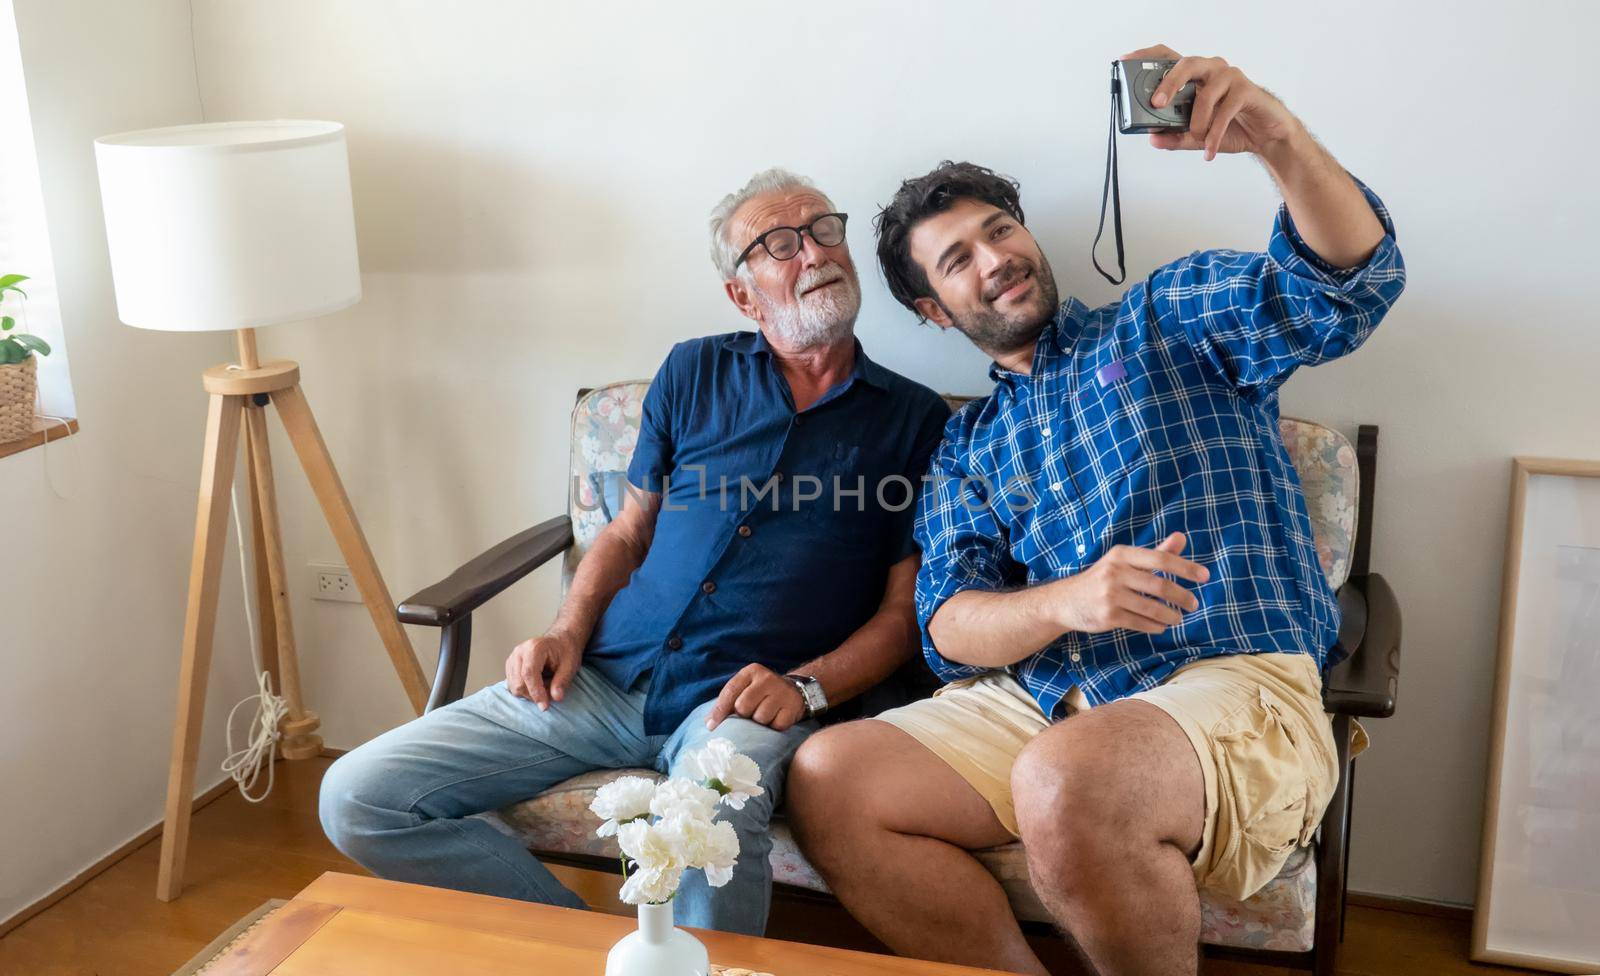 Hipster man taking care about his elderly father in house.